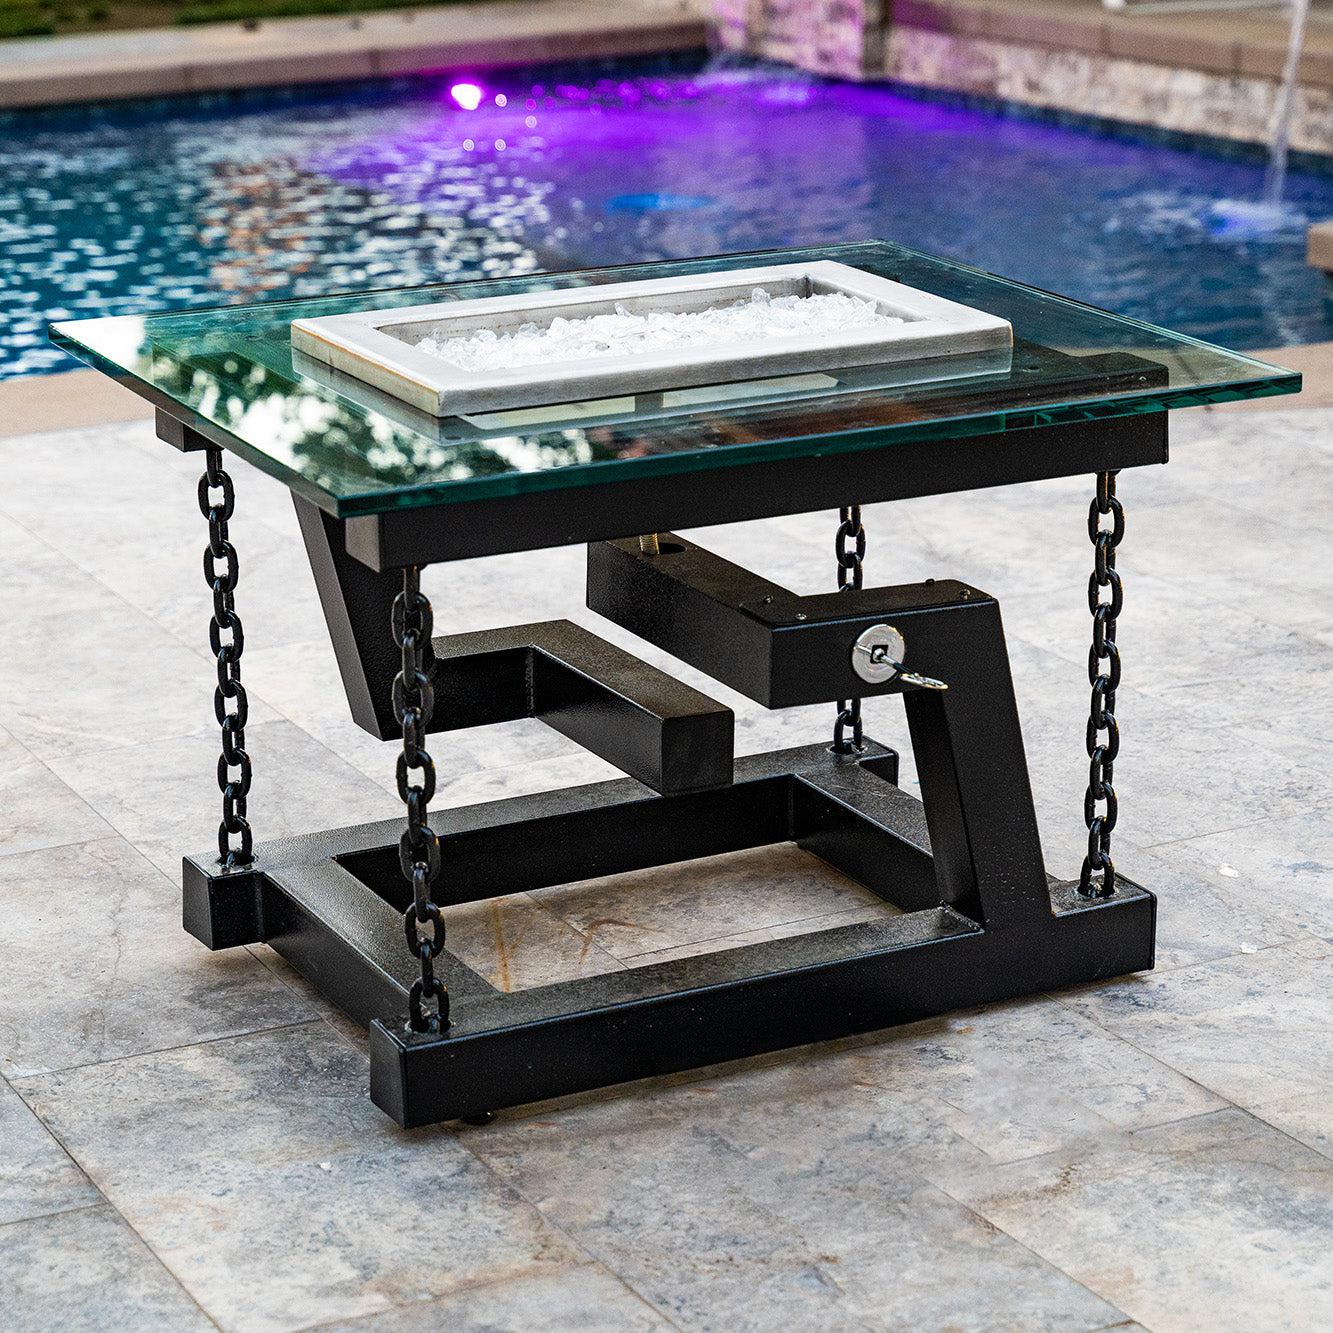 The Outdoor Plus Newton 52" Java Powder Coated Metal Liquid Propane Fire Pit with Chain Support & Match Lit Ignition